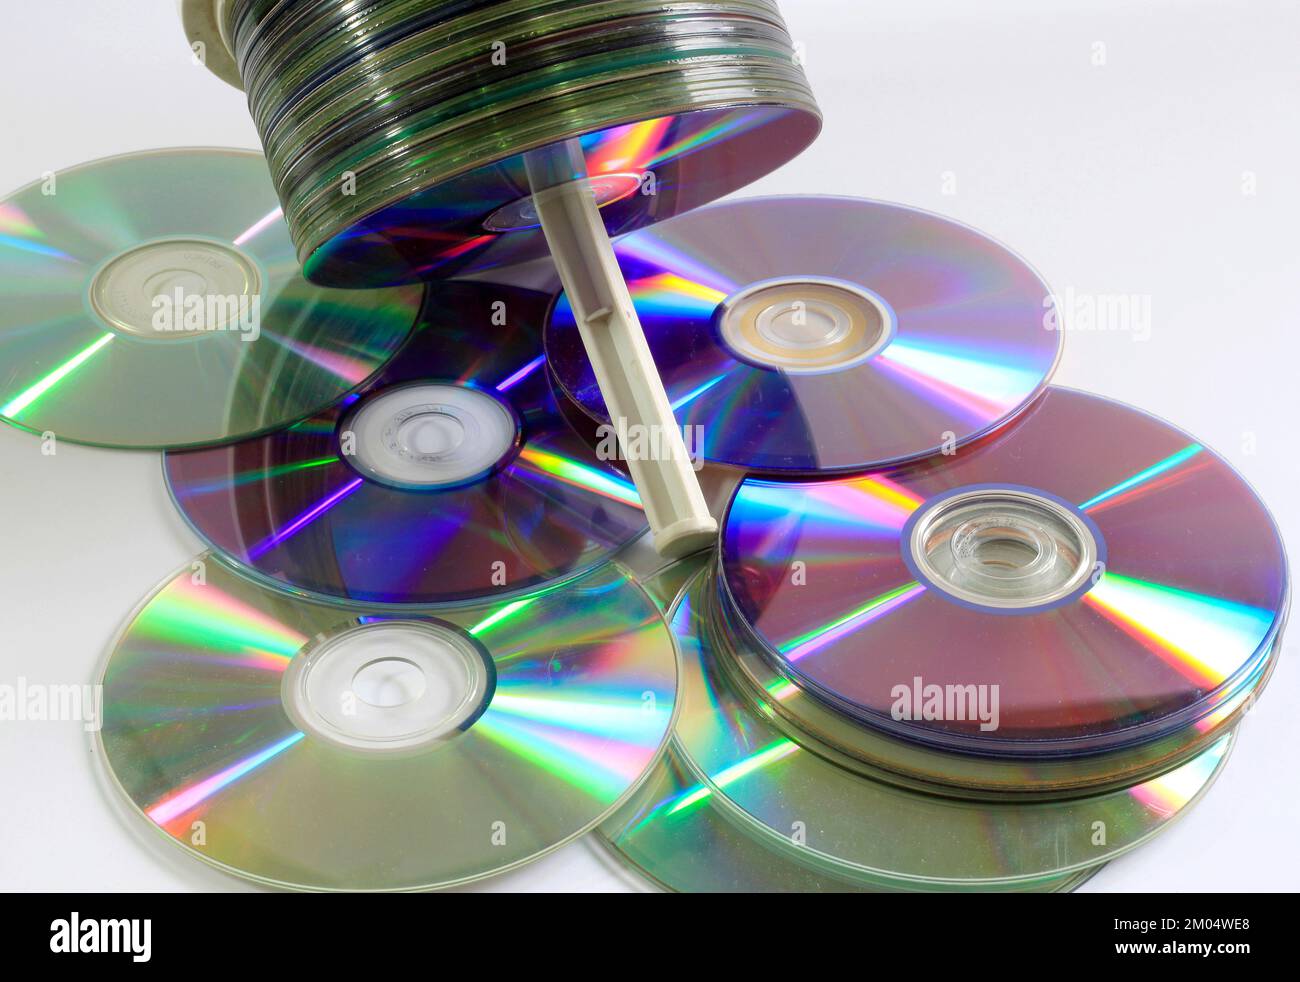 CD-R compact disc Foto Stock